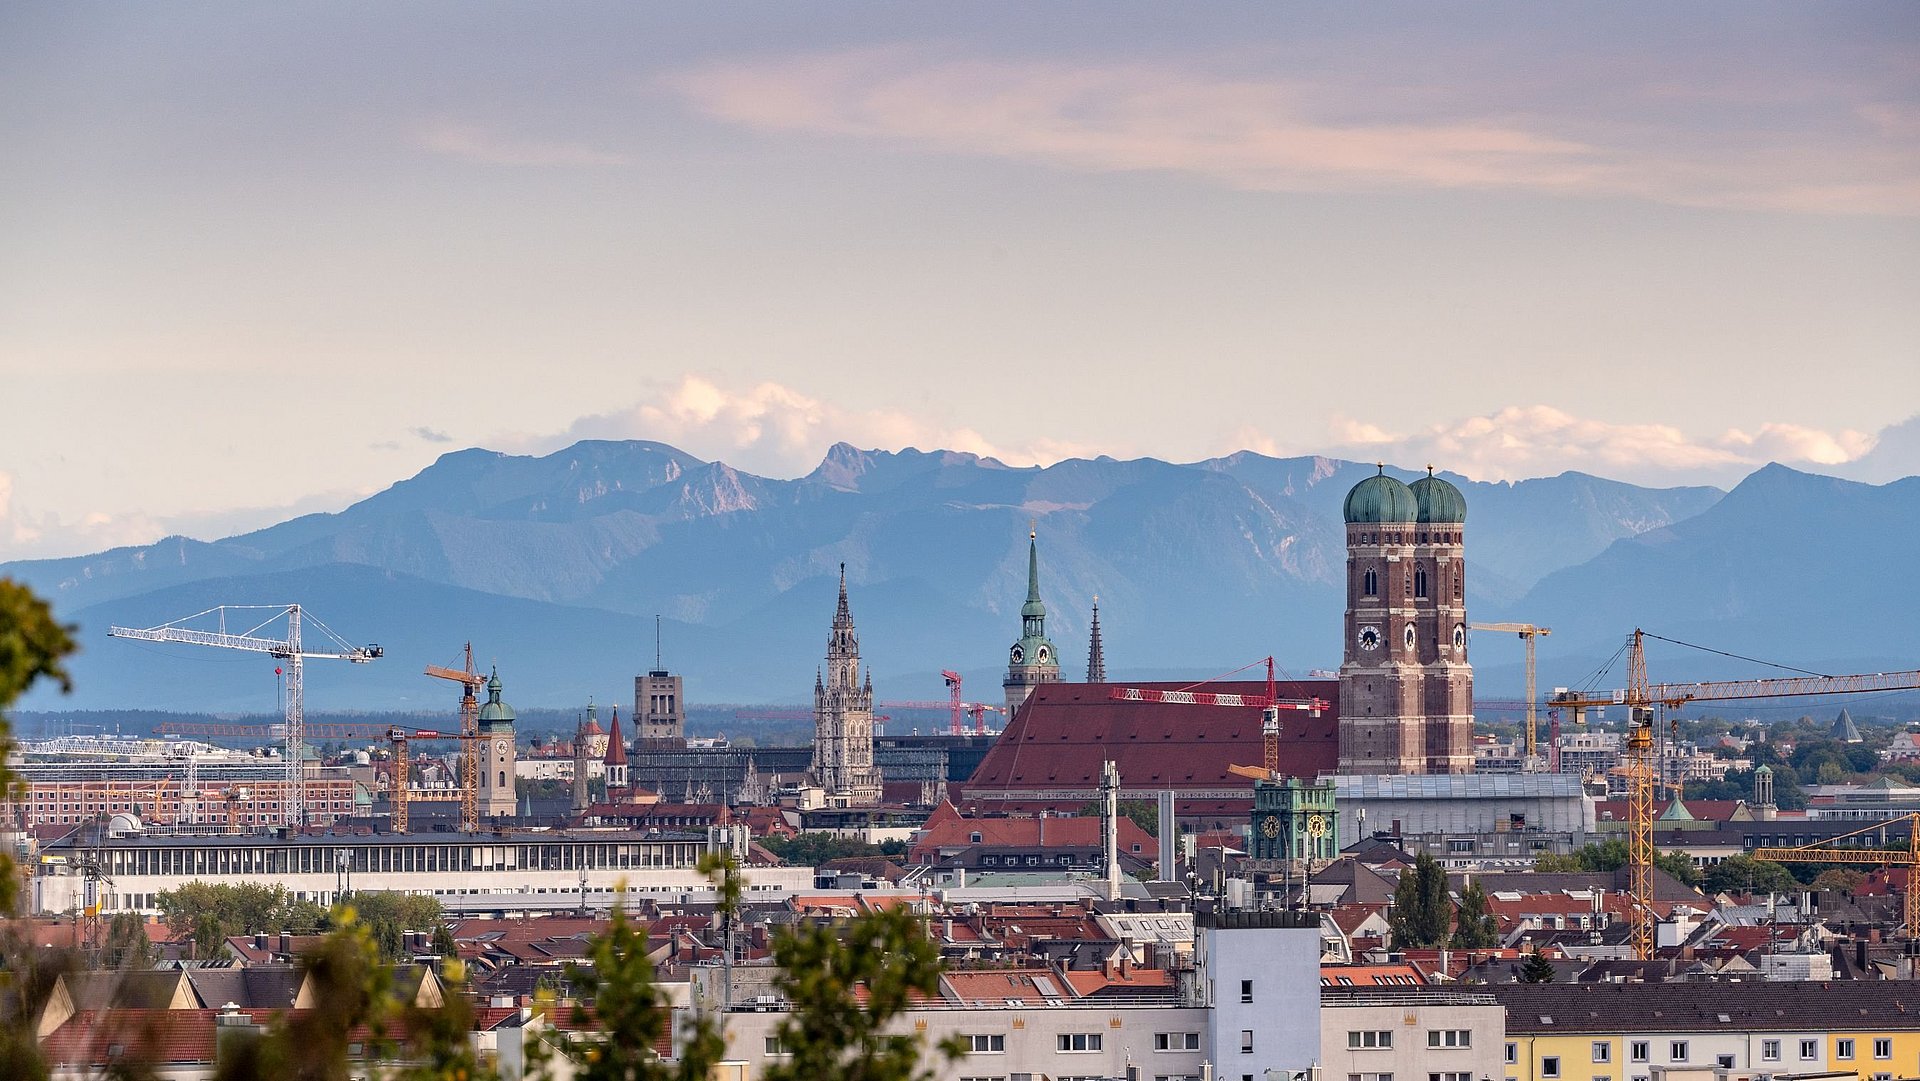 A shot of the city of Munich from above with the Alps in the background